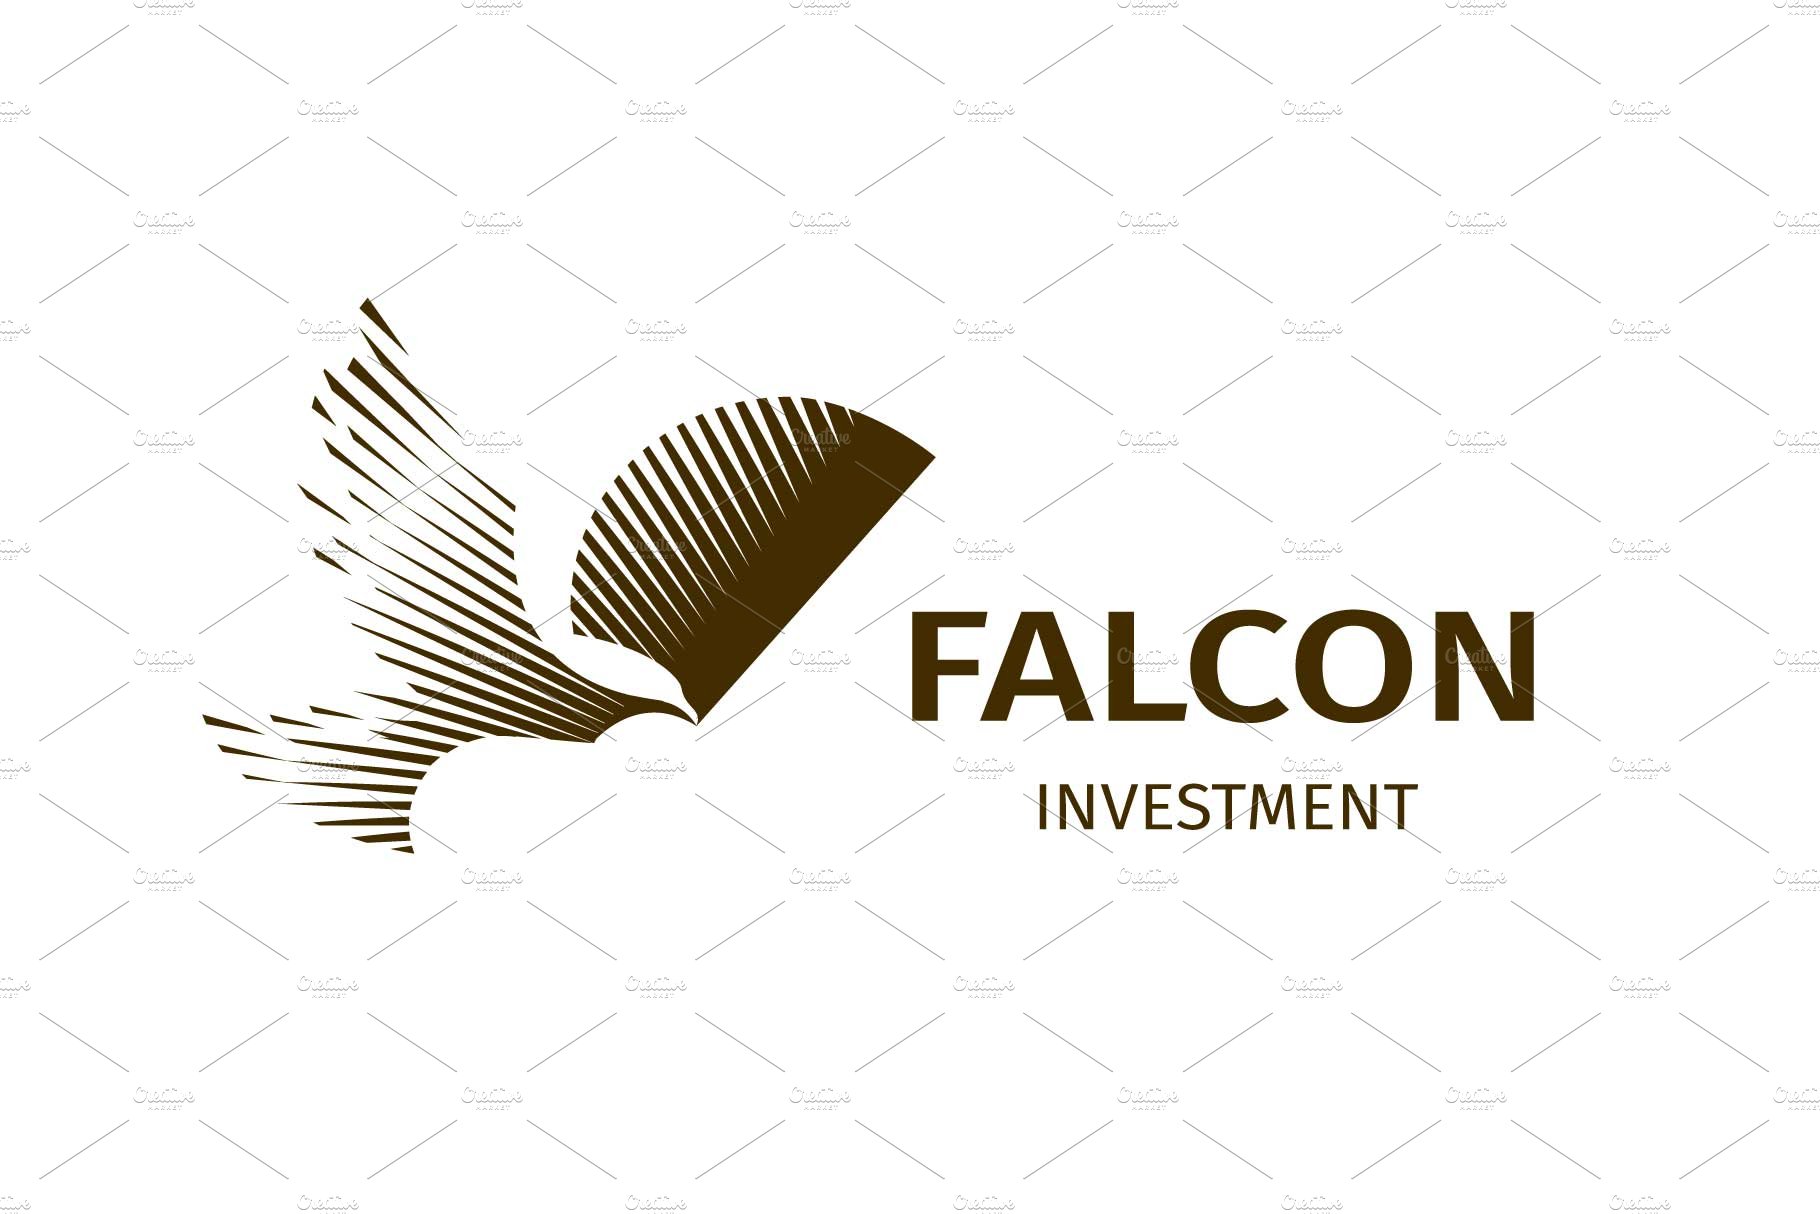 Falcon investment logo preview image.